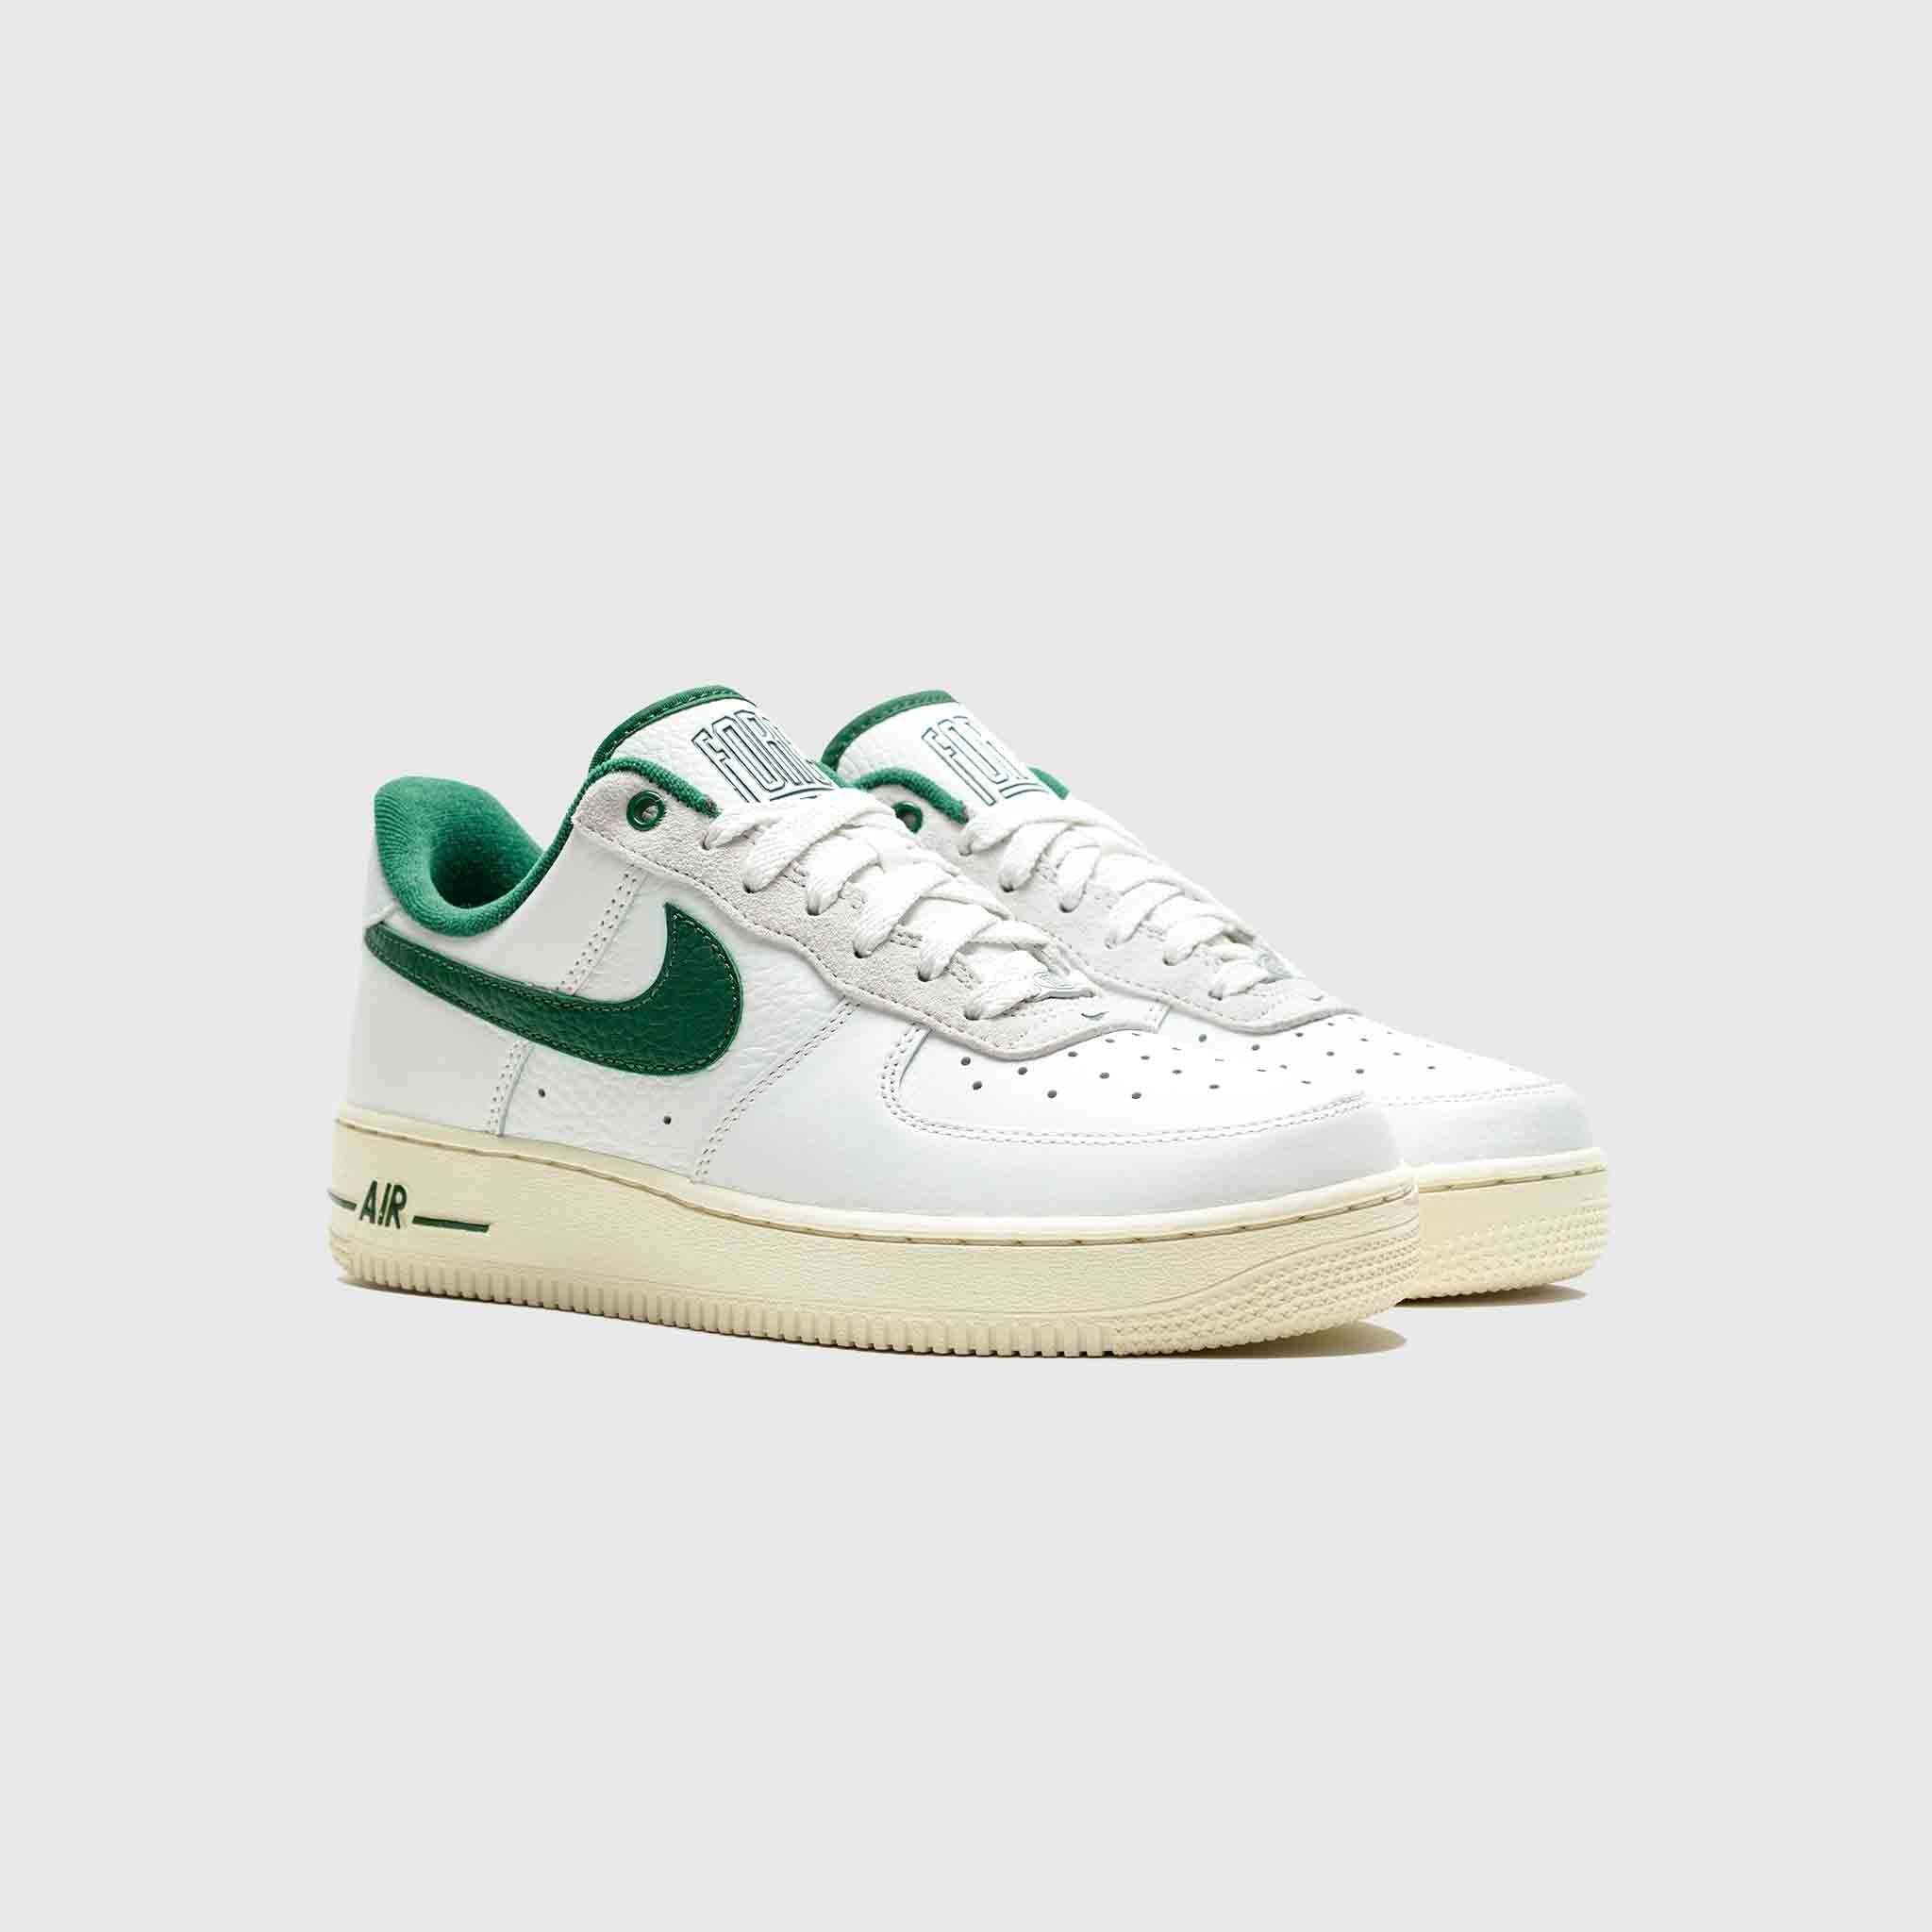 WMNS AIR FORCE 1 '07 LX "GORGE GREEN"